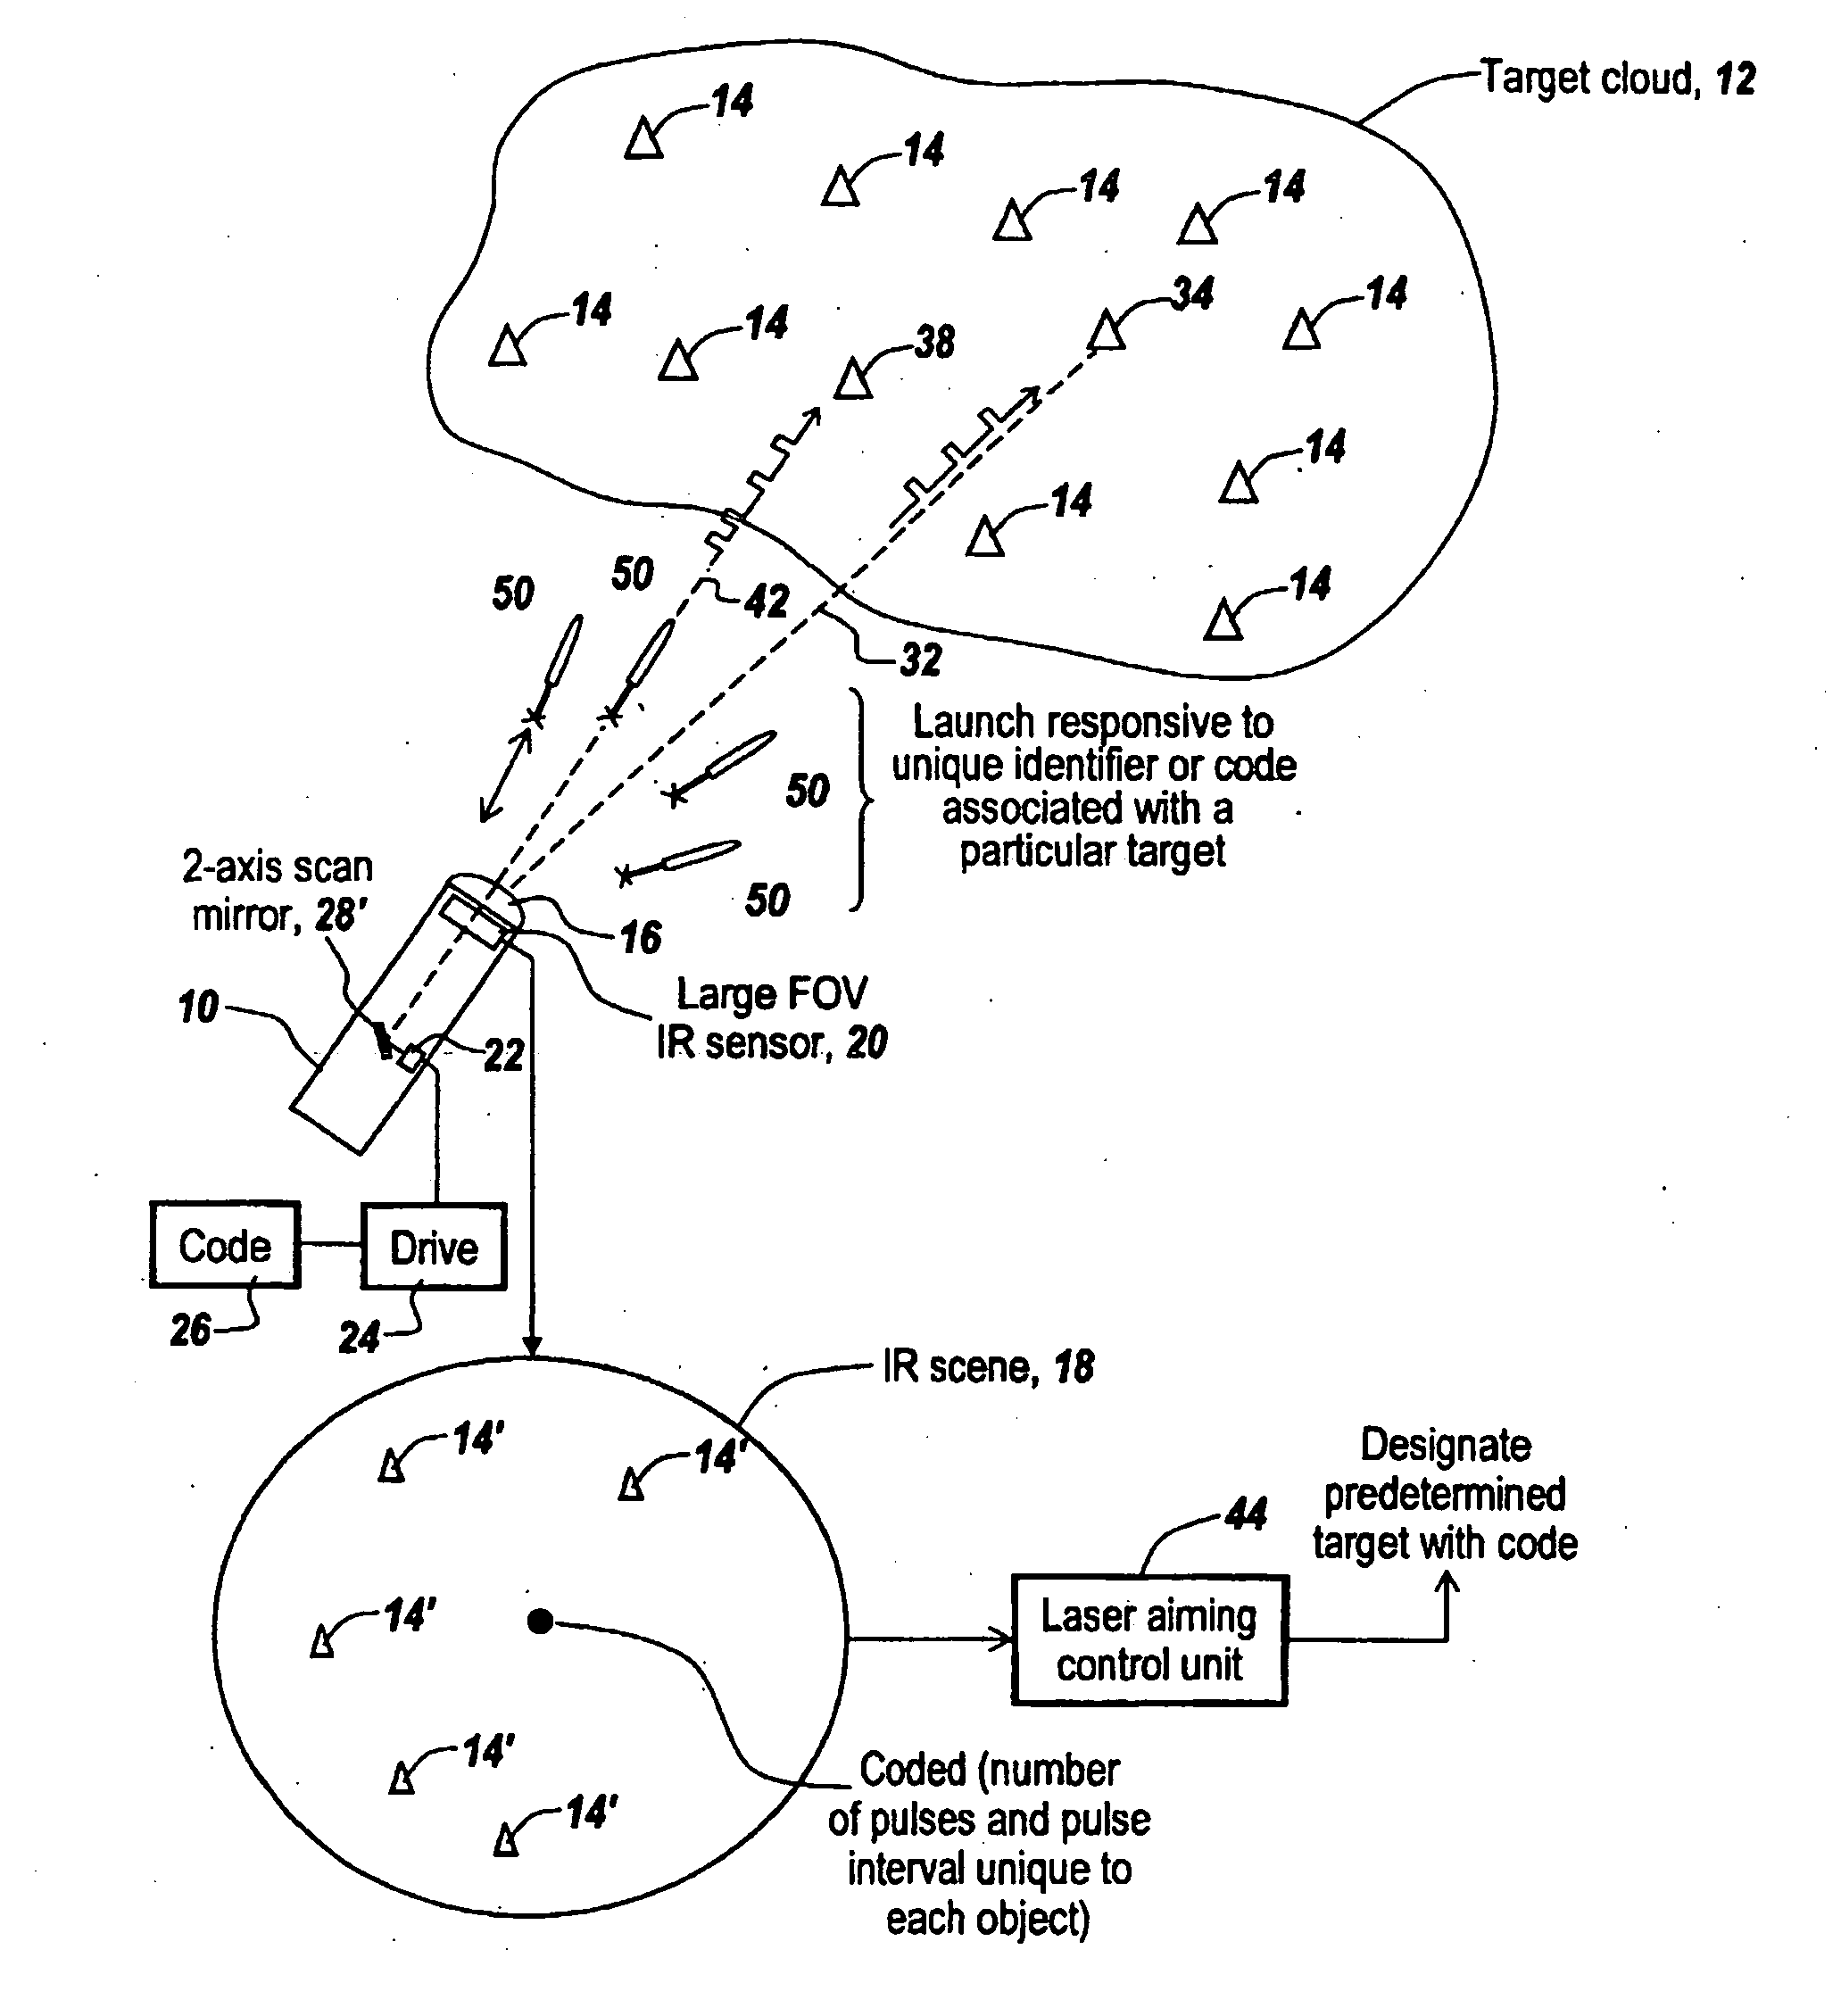 Method and Apparatus for Efficiently Targeting Multiple Re-Entry Vehicles with Multiple Kill Vehicles